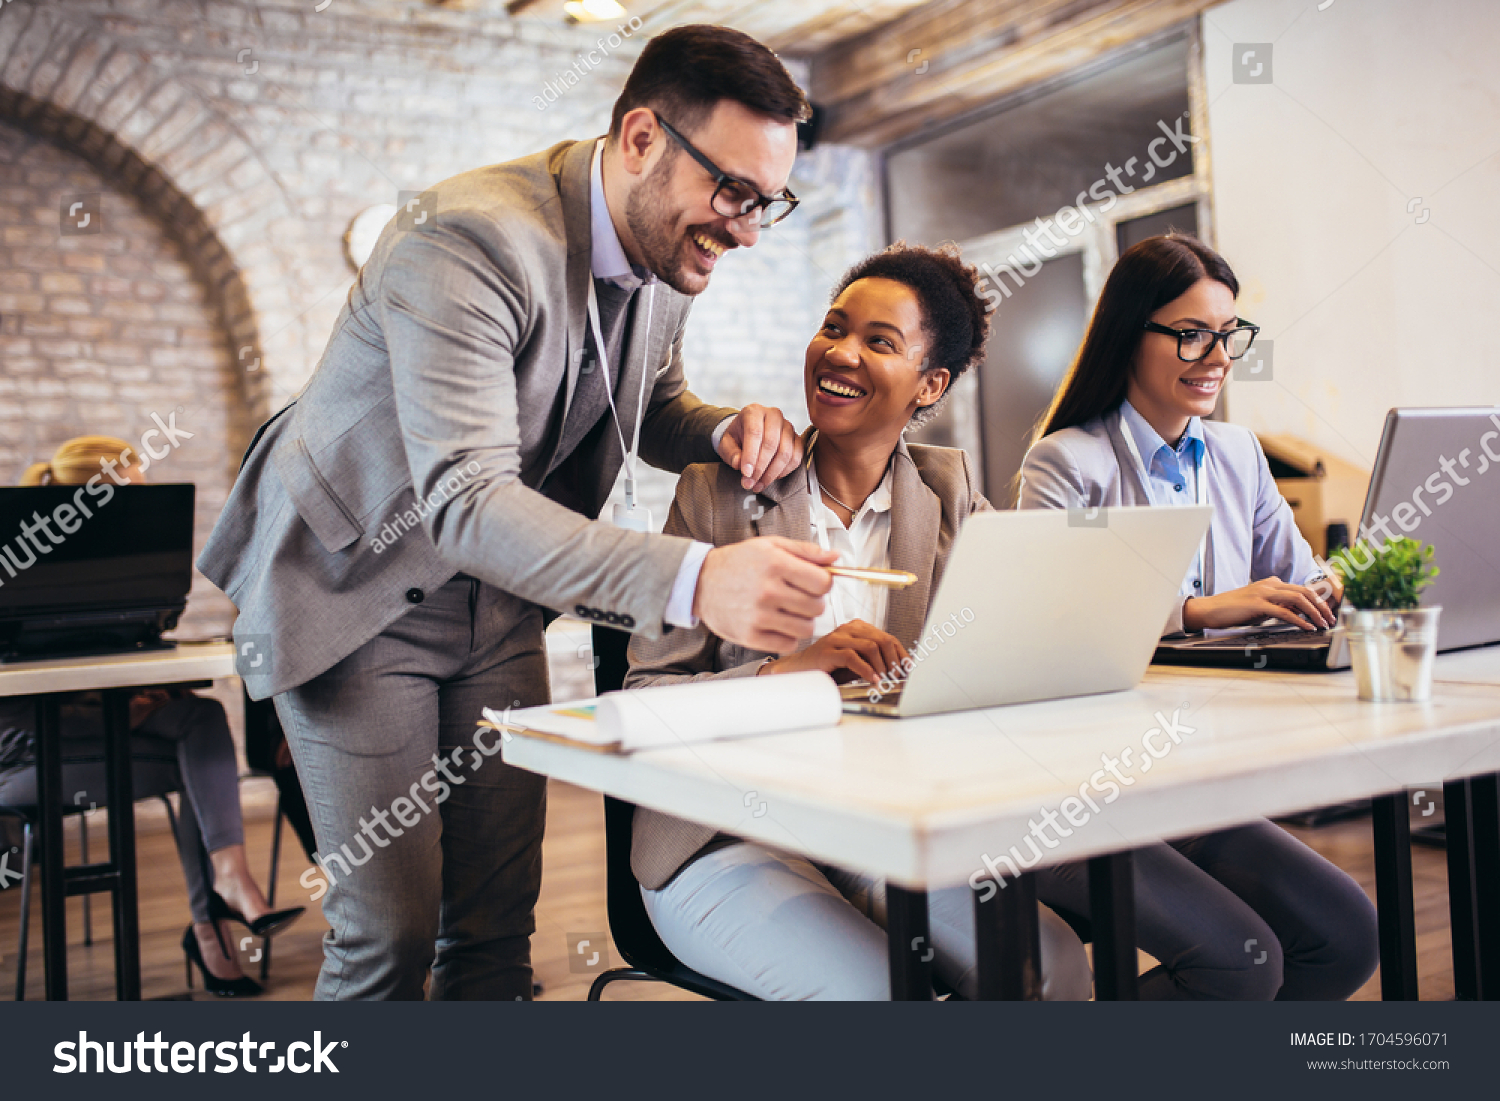 Group of business people working in office and discussing new ideas #1704596071